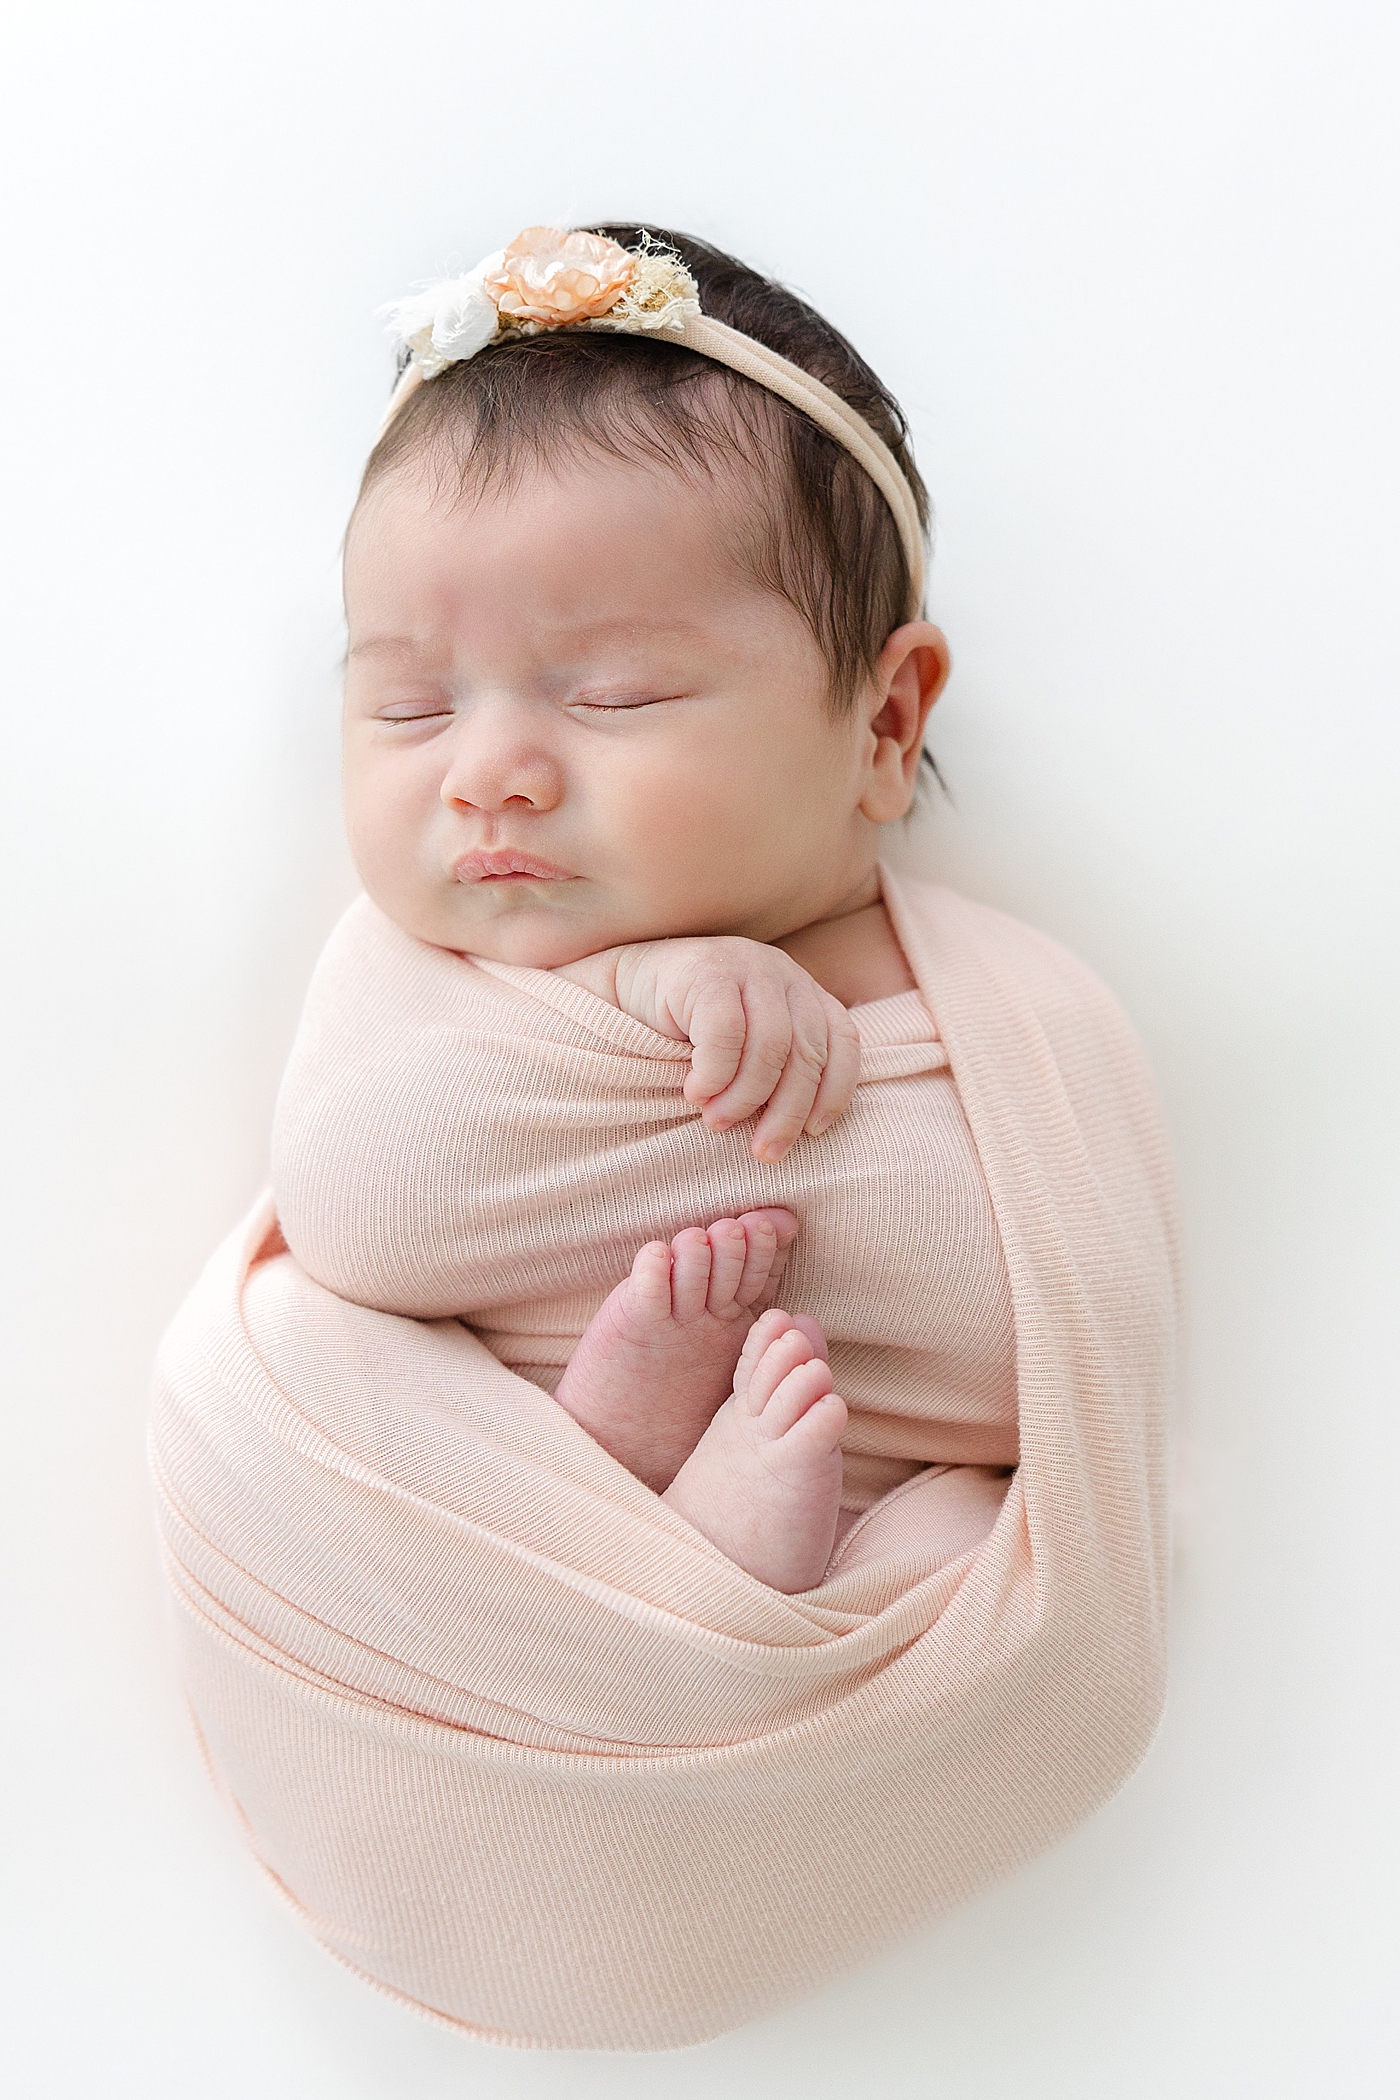 Sleeping baby in headband and swaddle during her Austin Studio Newborn Session | Photo by Sana Ahmed Photography